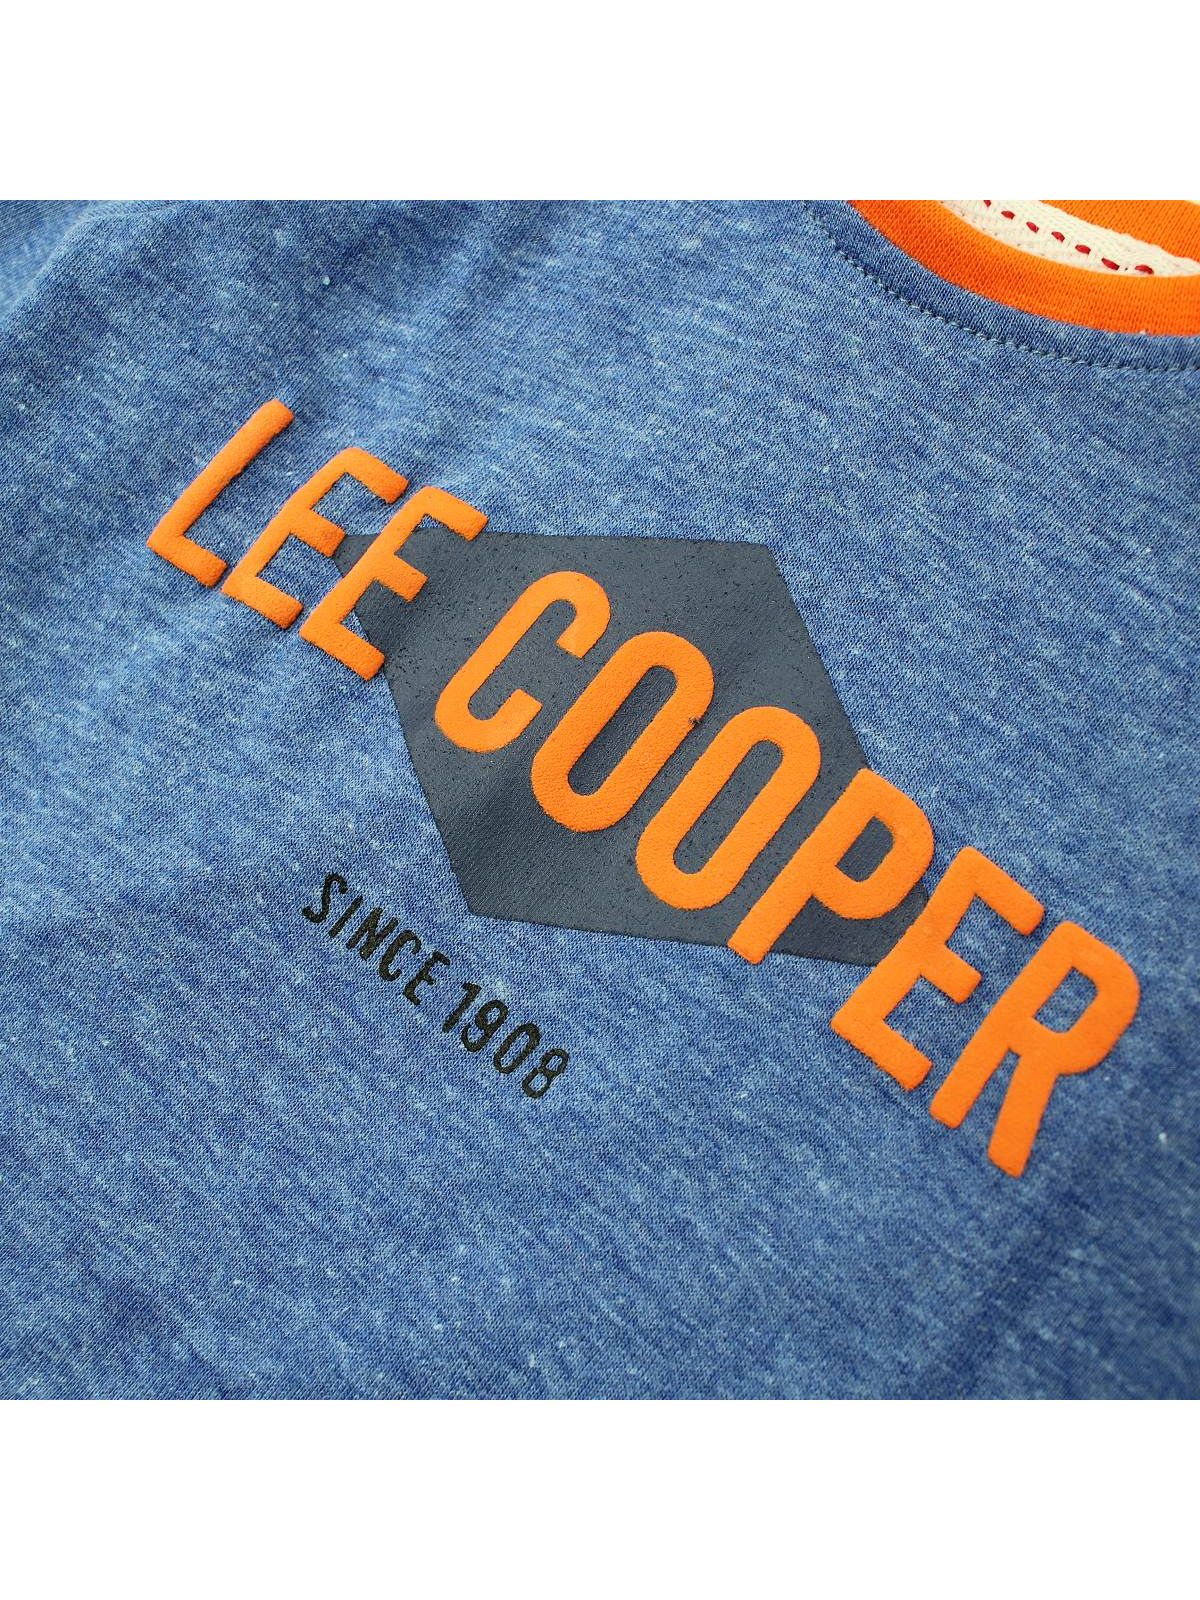 Lee Cooper Clothing of 3 pieces